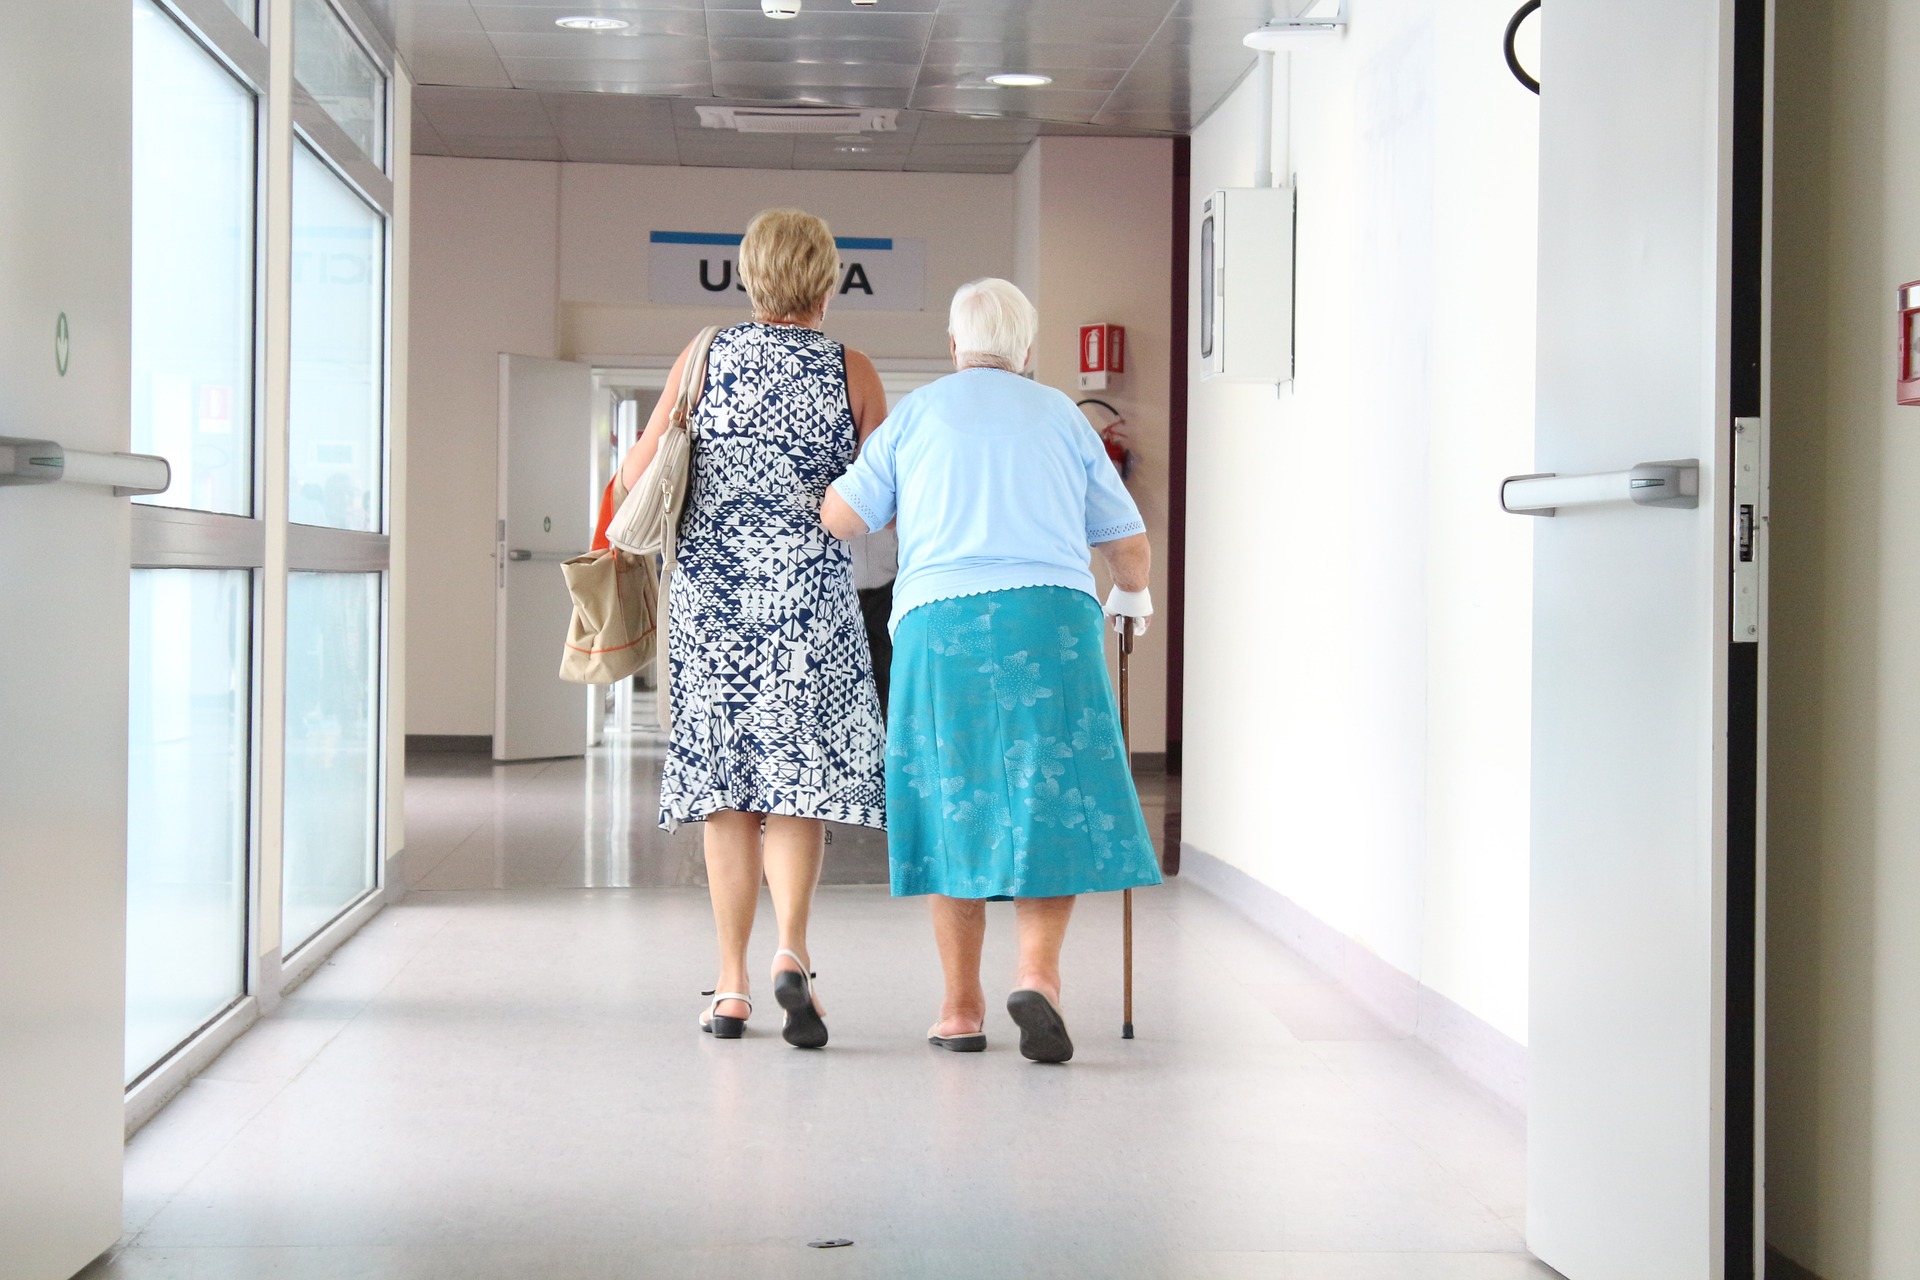 Patients walking down hospital hallway Image by sarcifilippo from Pixabay 